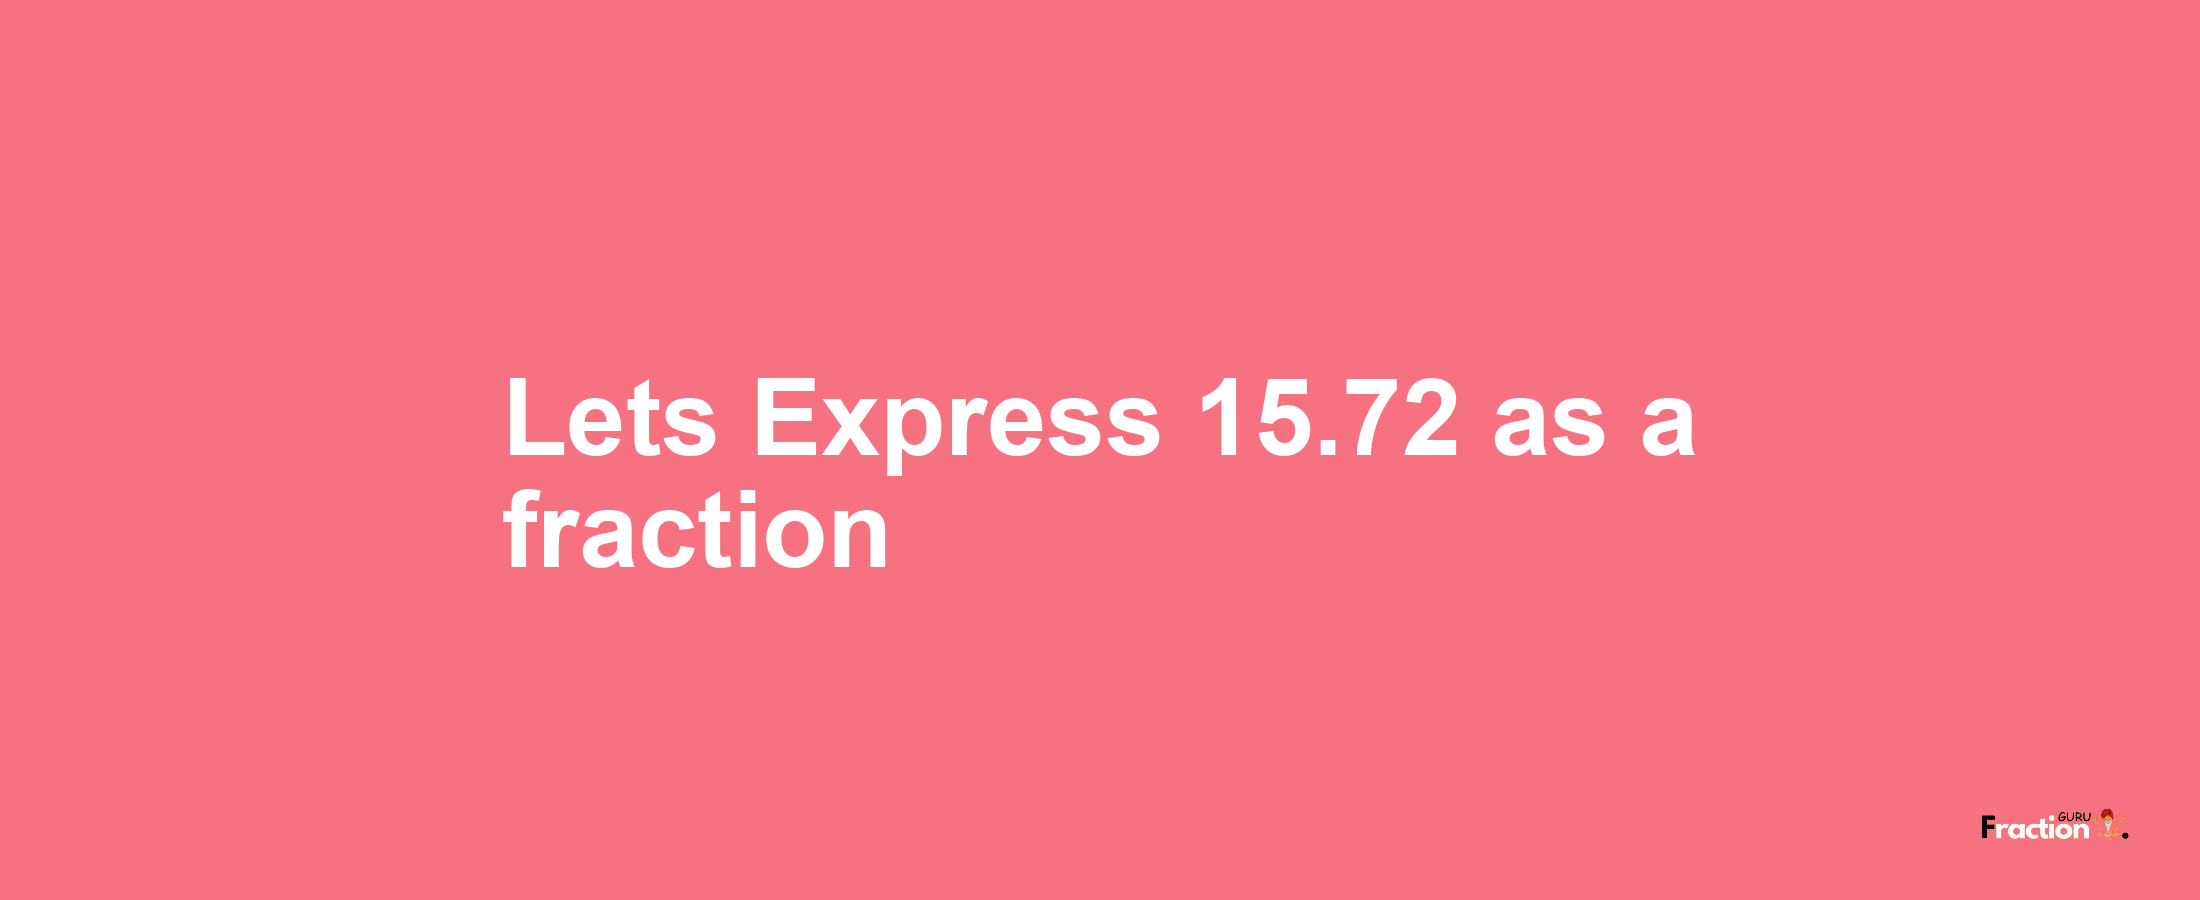 Lets Express 15.72 as afraction